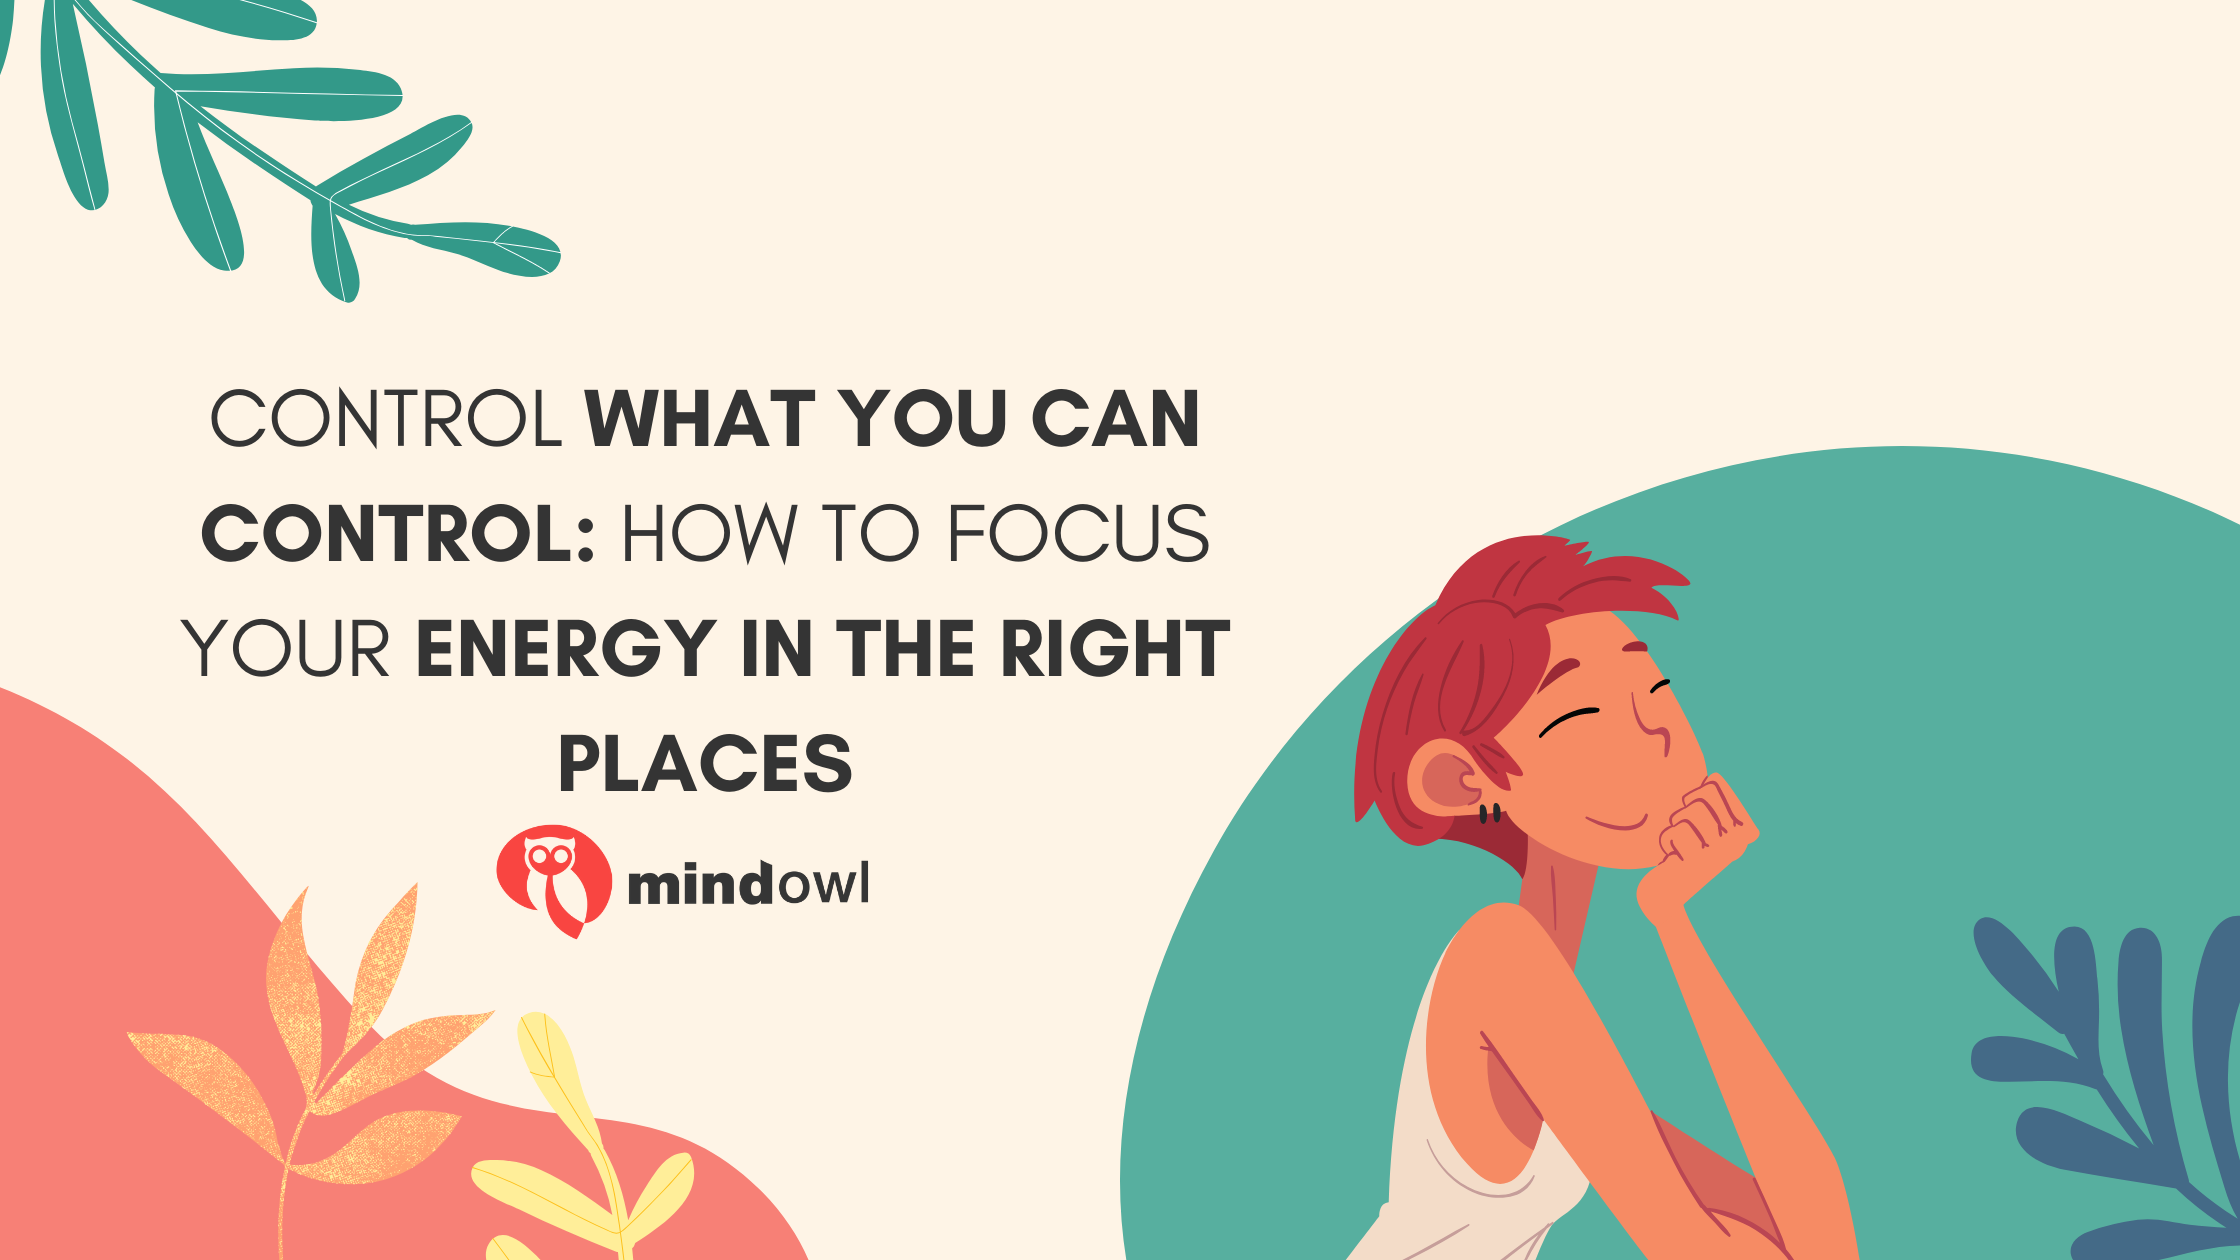 Control what you can control: How to focus your energy in the right places